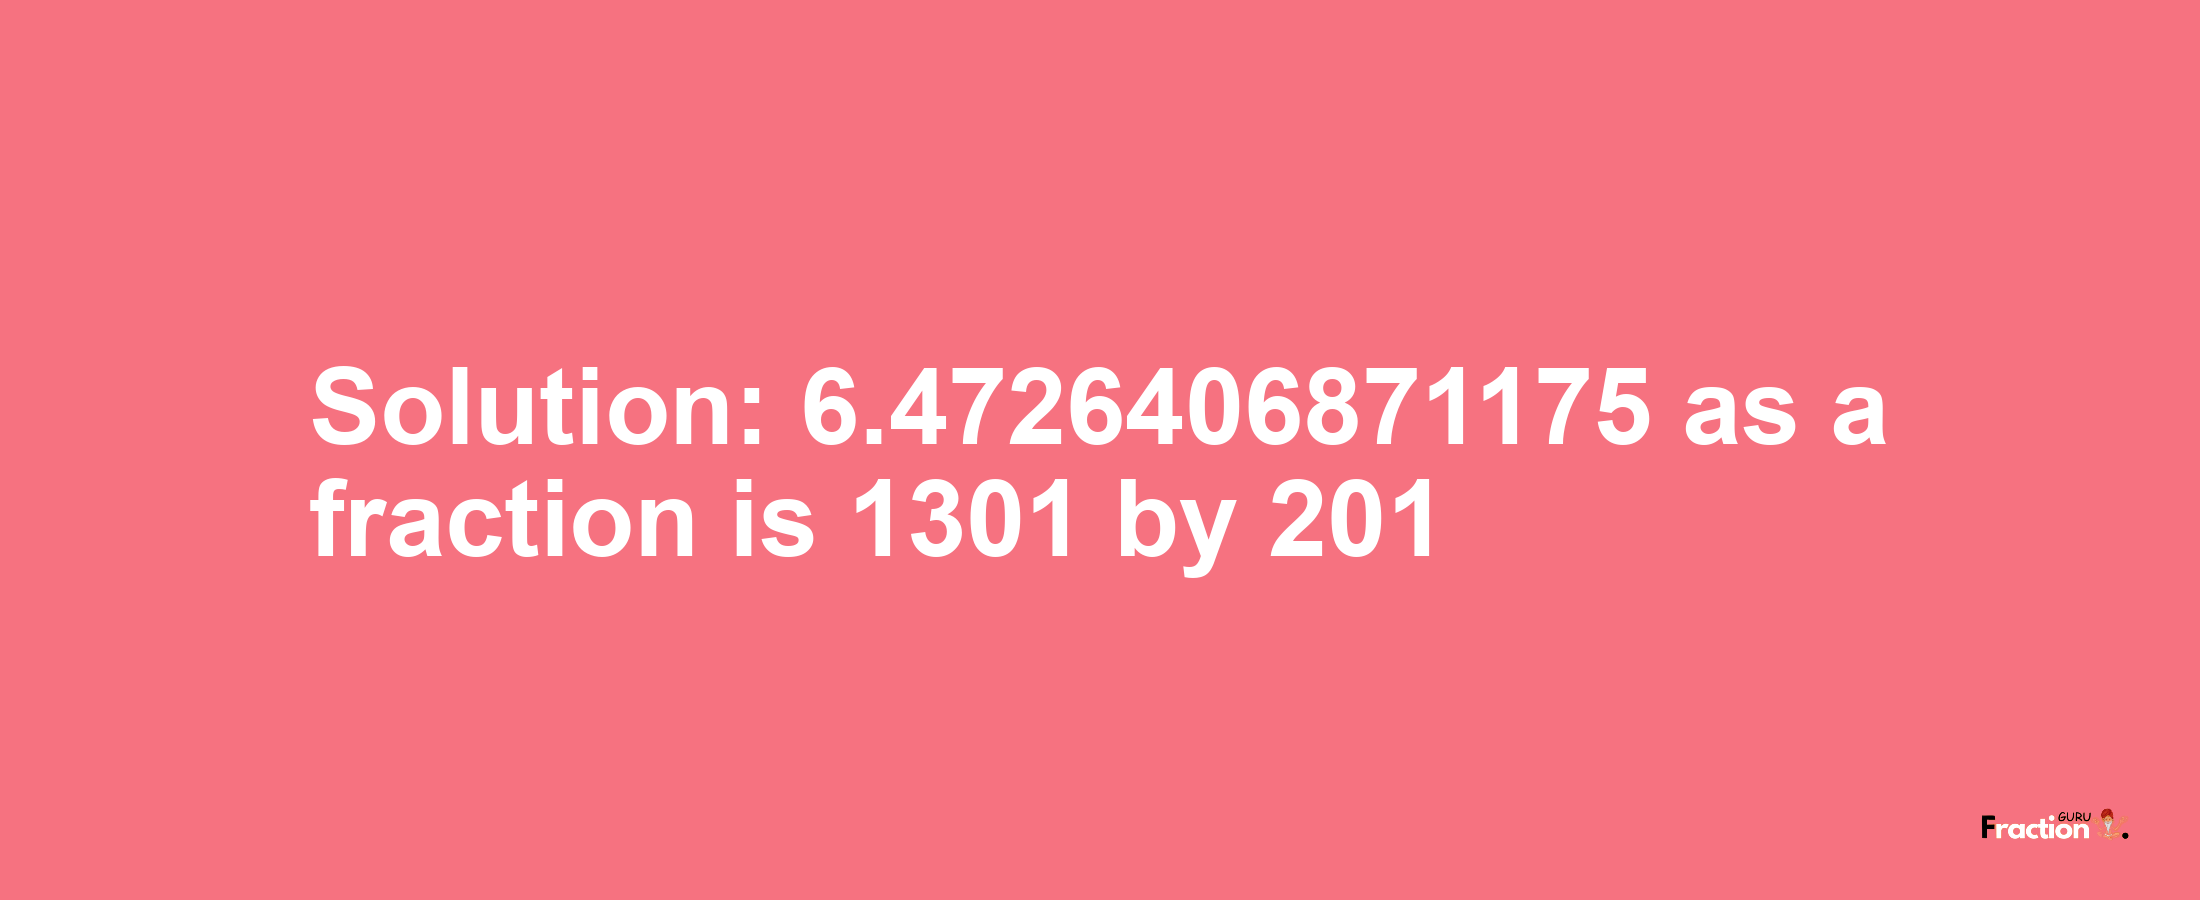 Solution:6.4726406871175 as a fraction is 1301/201